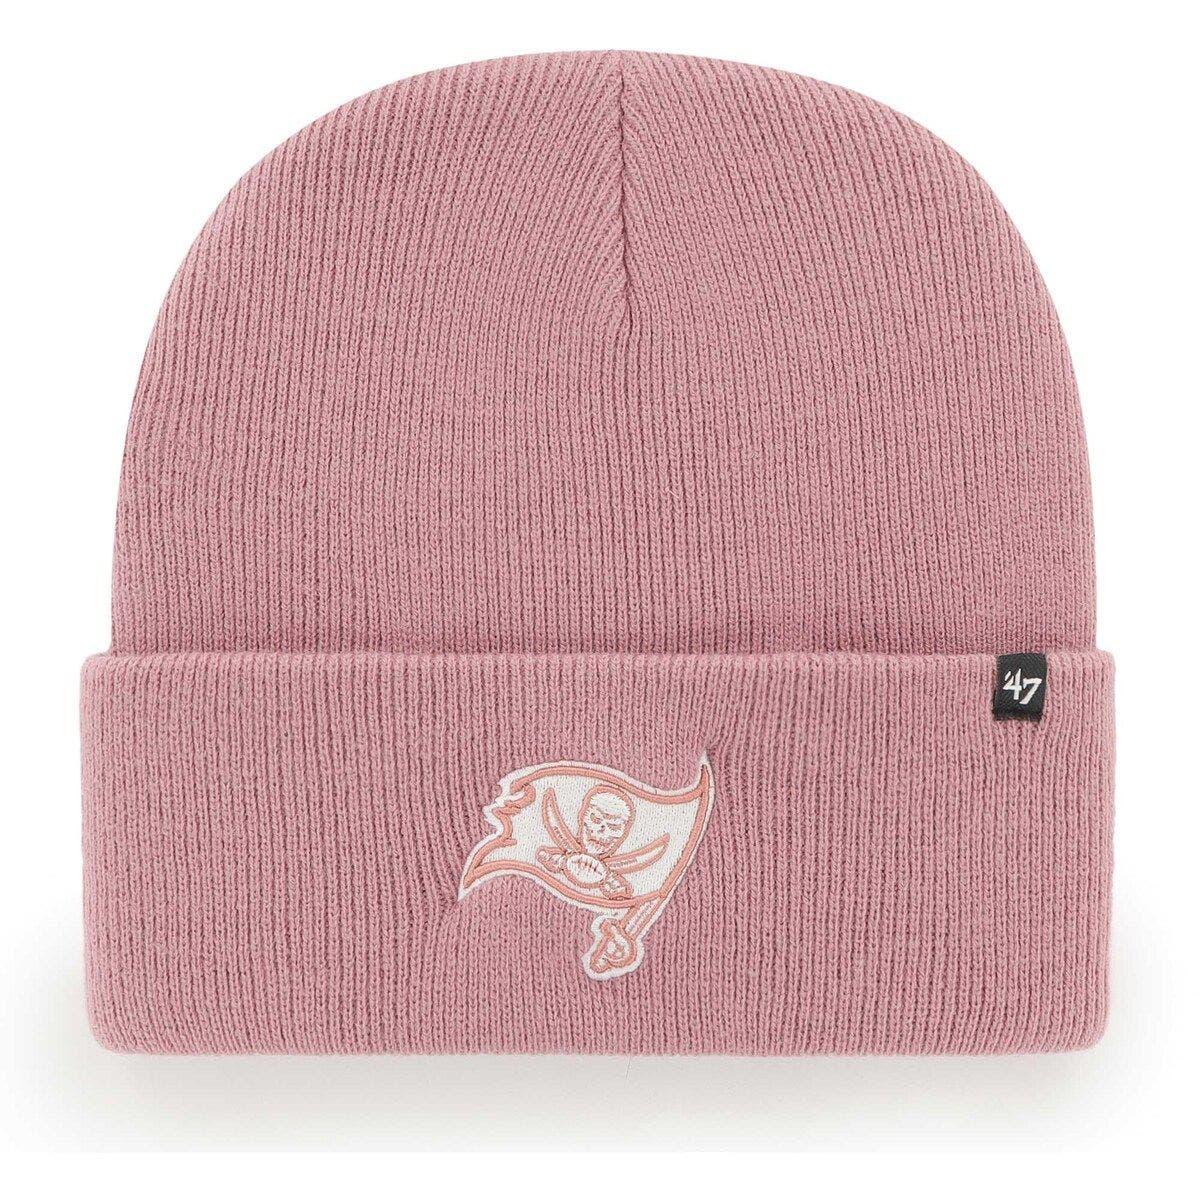 47 Tampa Bay Buccaneers Haymaker Cuffed Knit Hat At Nordstrom in Pink